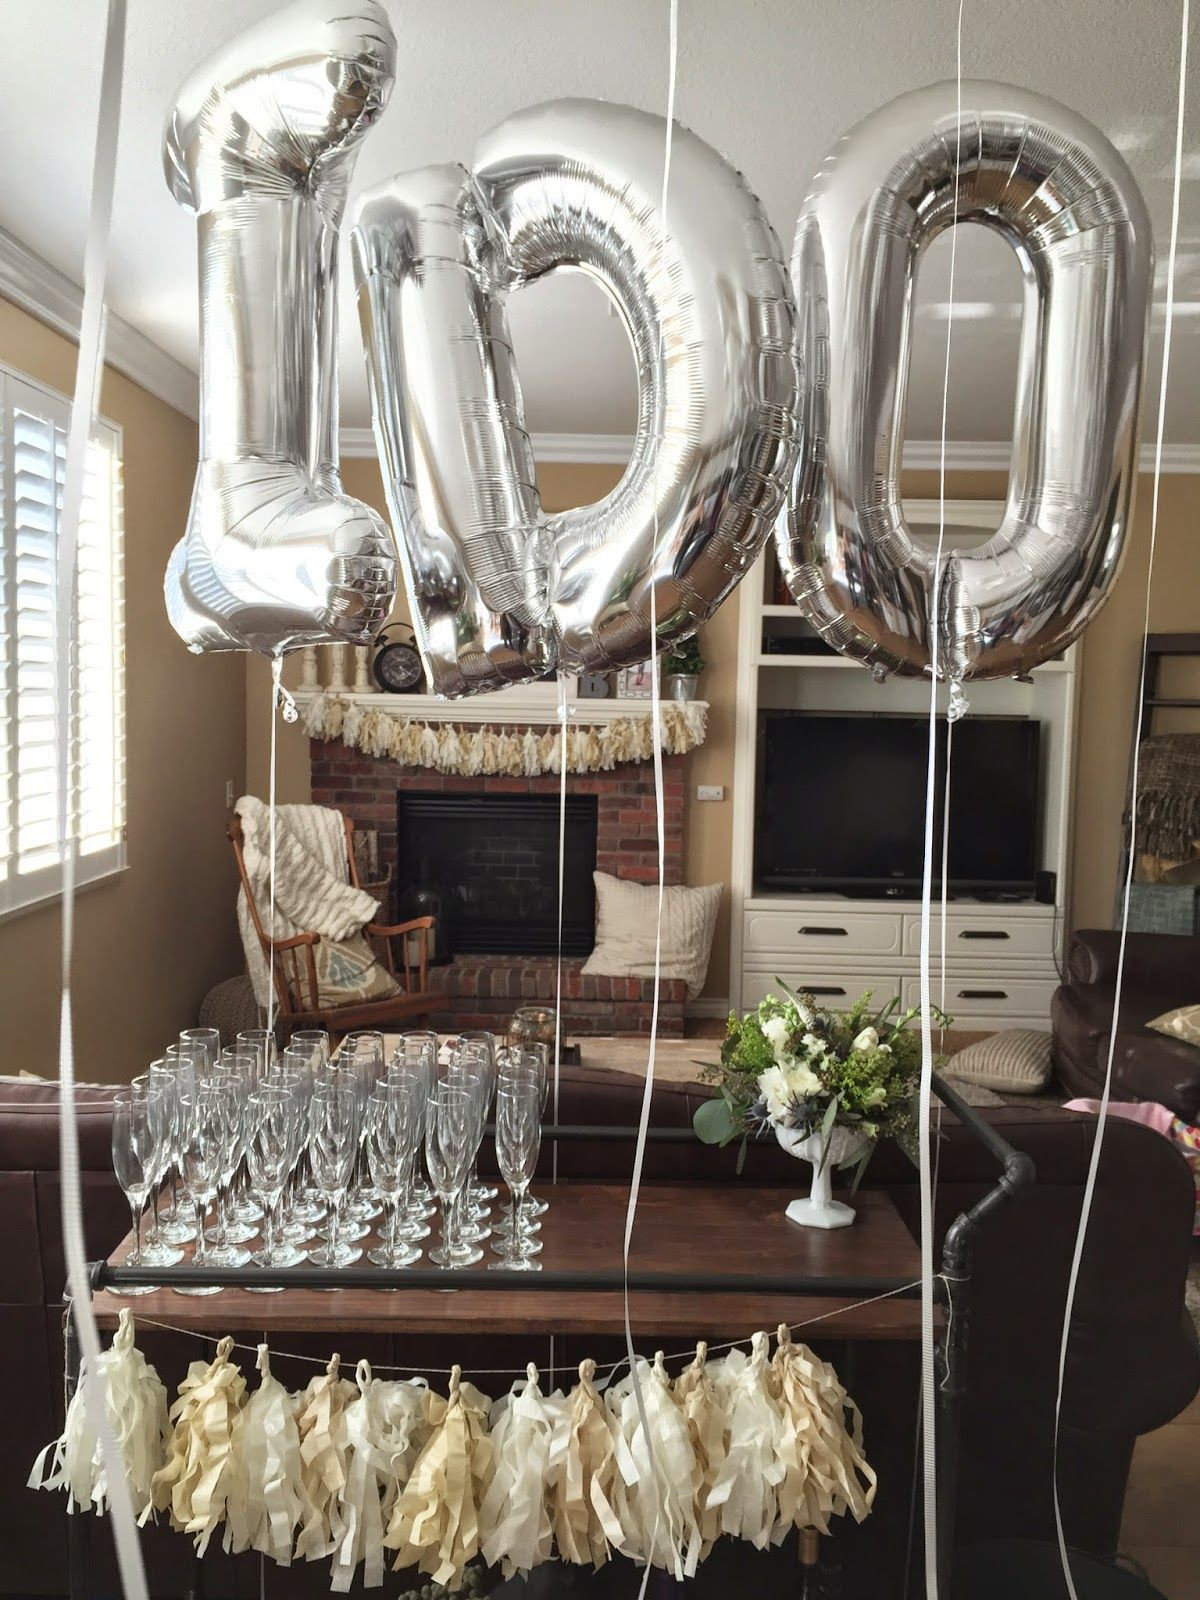 Engagement Party Ideas On Pinterest
 Gold silver and white engagement party